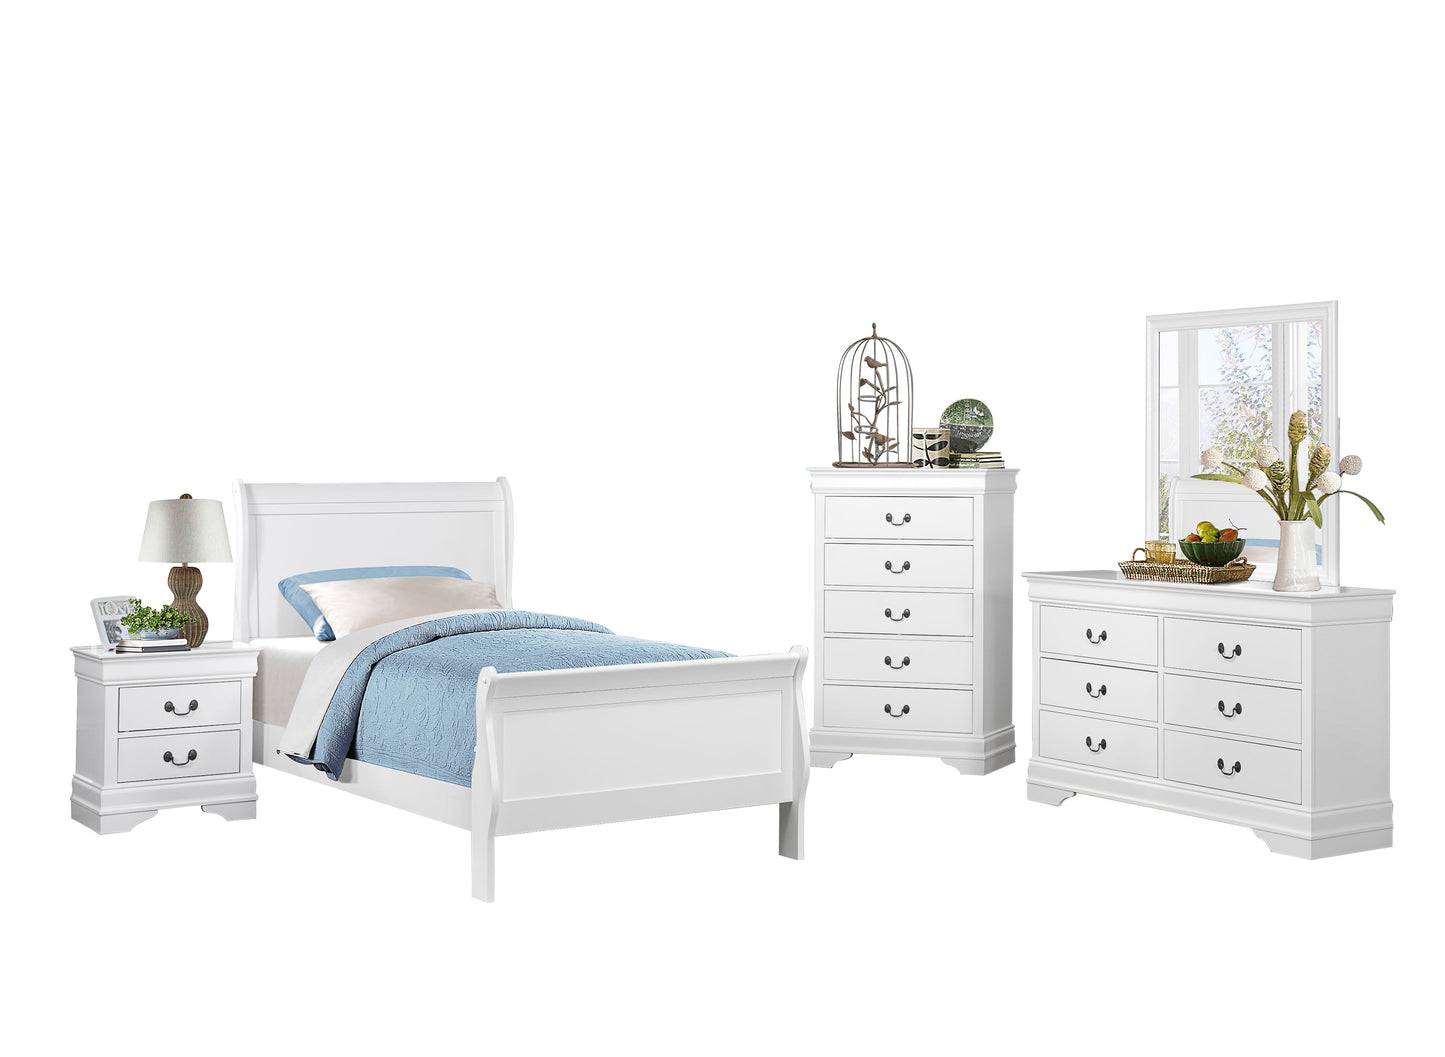 Manburg Louis Philippe 5PC Bedroom Set Twin Sleigh Bed, Dresser, Mirror, Nightstand, Chest in Burnished White